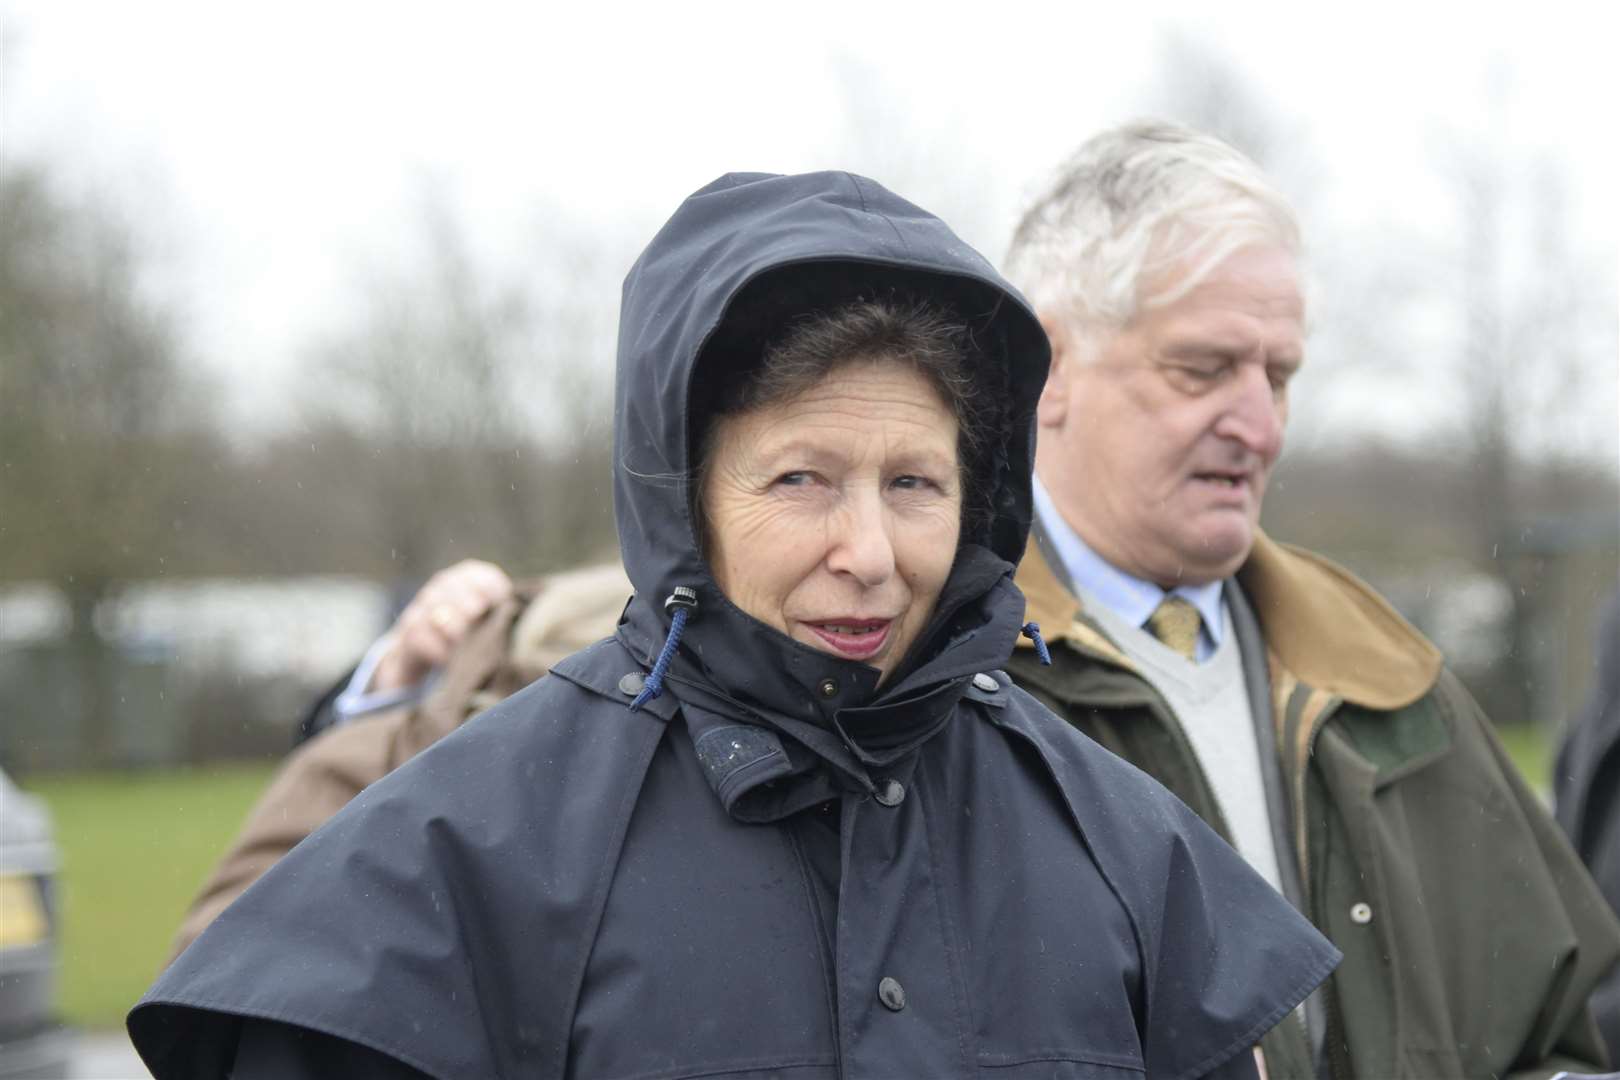 Princess Anne accompanied by Lord-Lieutenant of Kent Viscount De L'Isle arrives at the agri-expo at Detling Showground in 2016